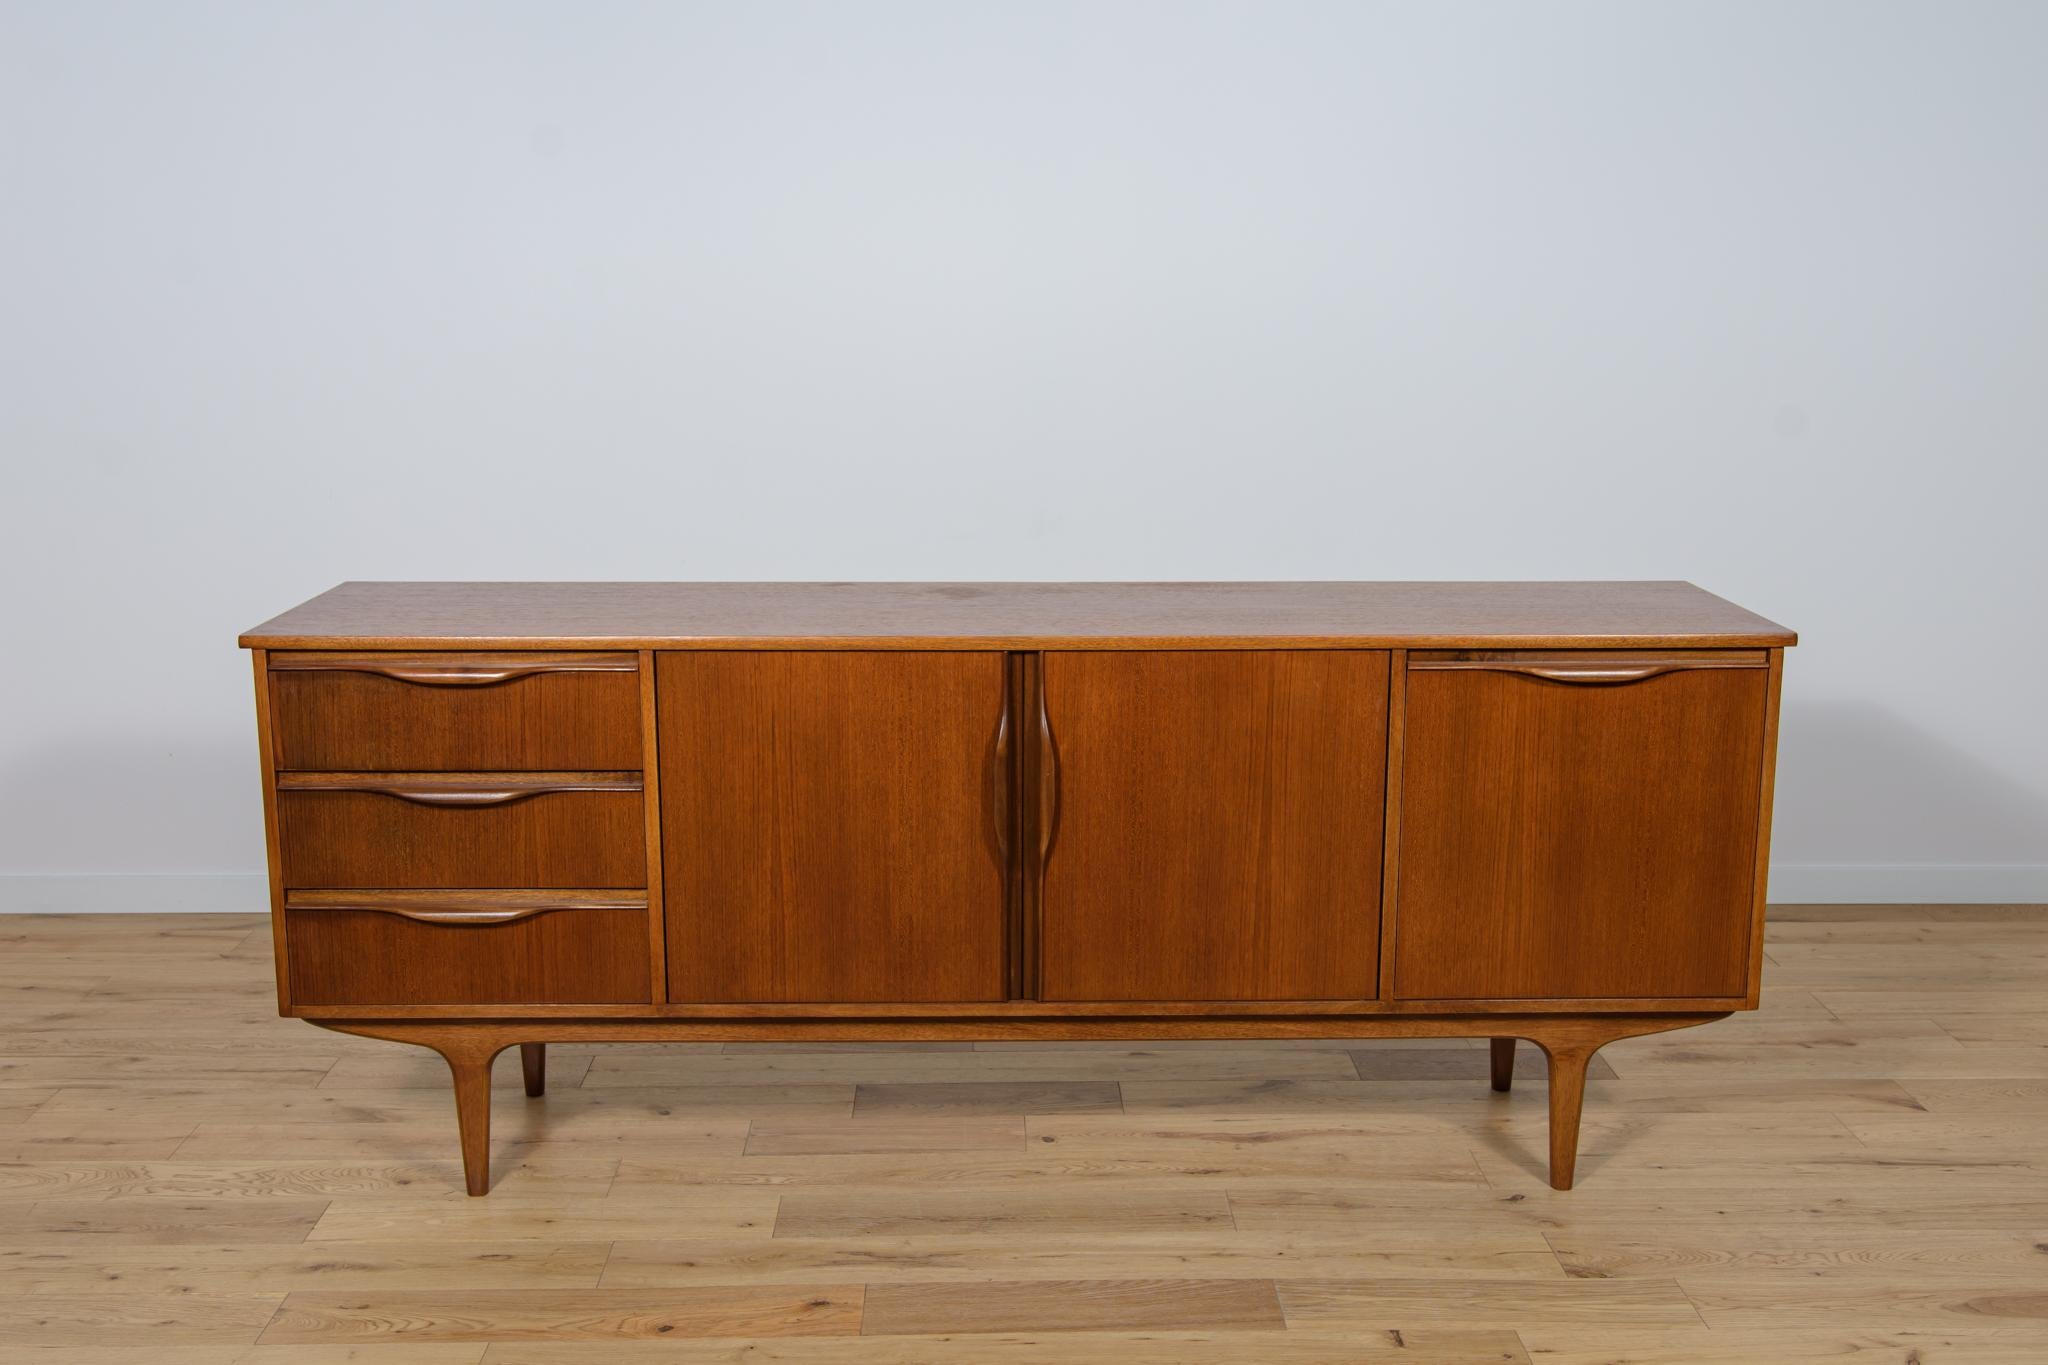 Sideboard produced in the 1960s in the British Jentique manufacture. The sideboard consists of three drawers and a cabinet with two doors and a bar. The sideboard has contoured solid wood handles. Sideboard made of teak wood. The sideboard has been